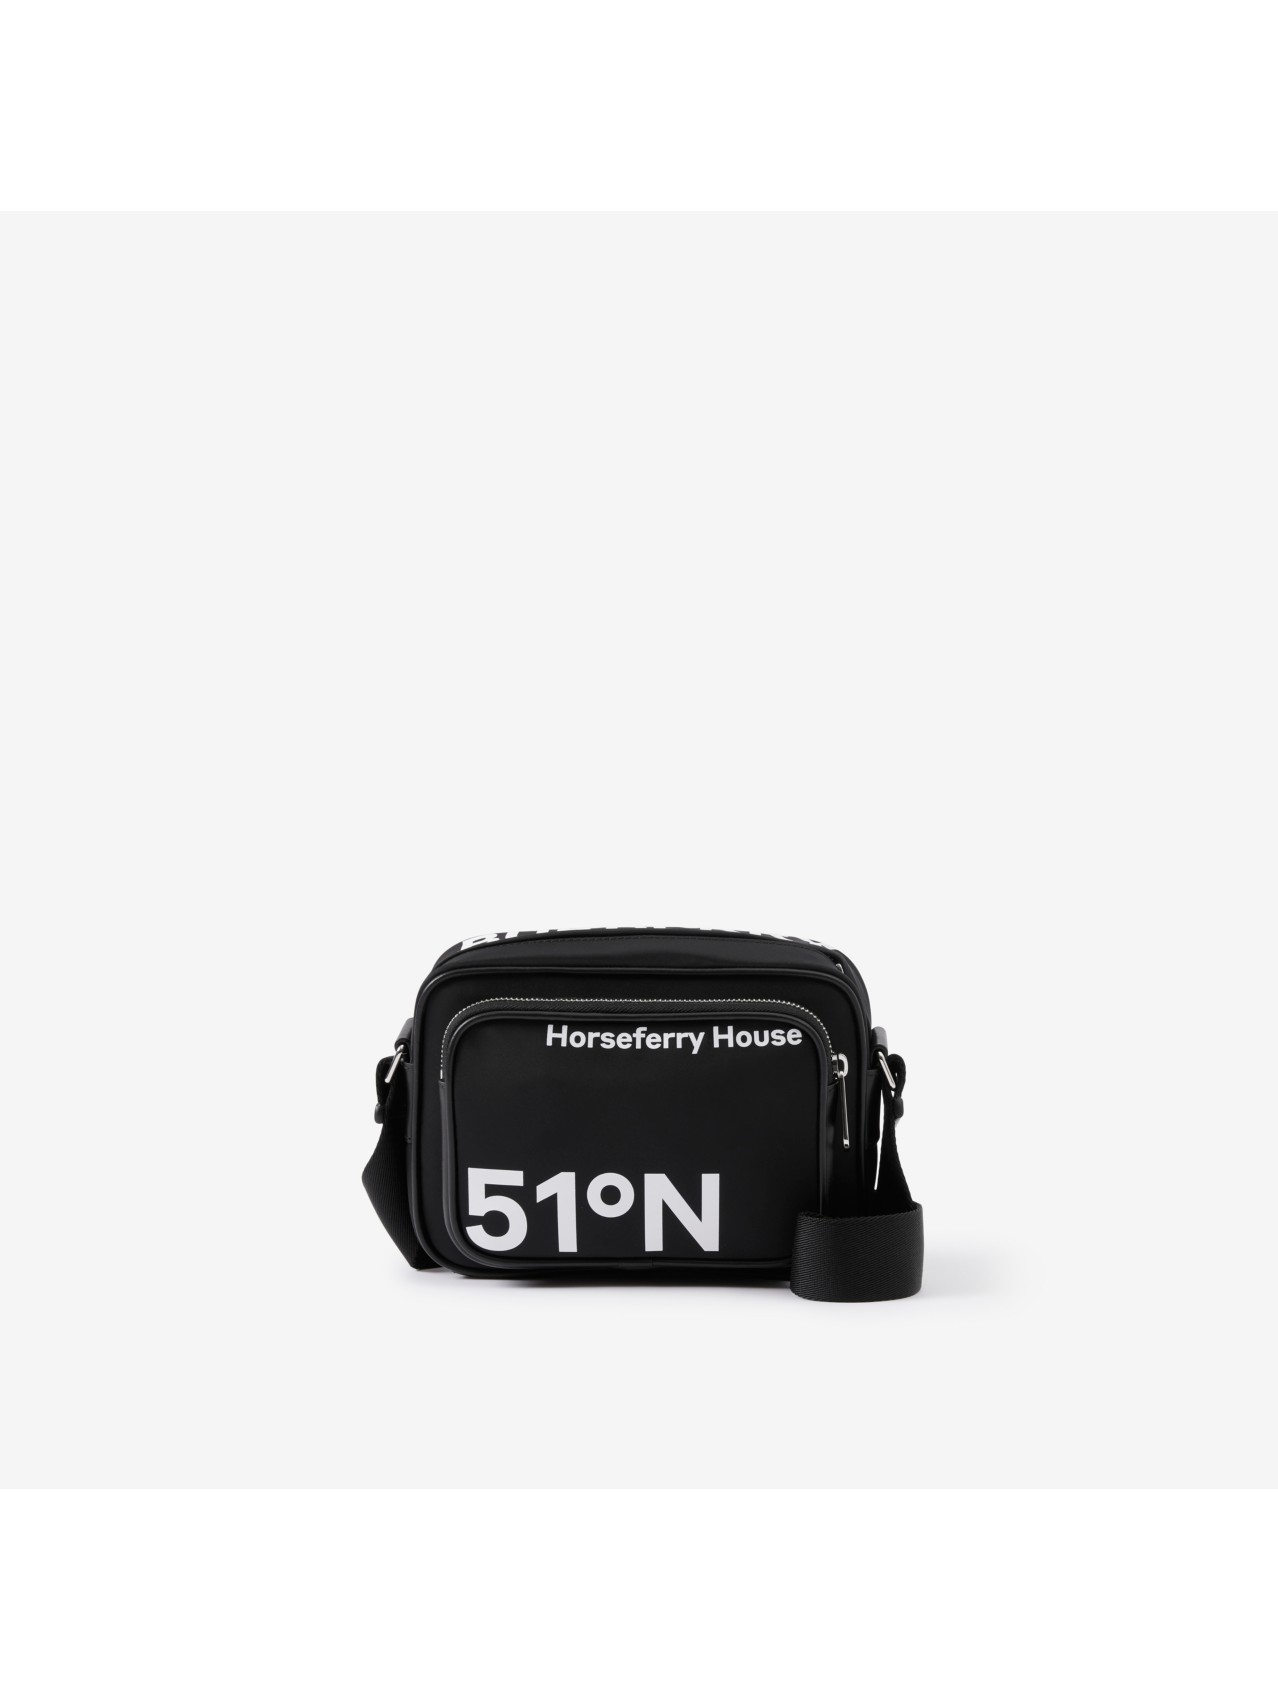 Paddy Bag in Black | Burberry® Official